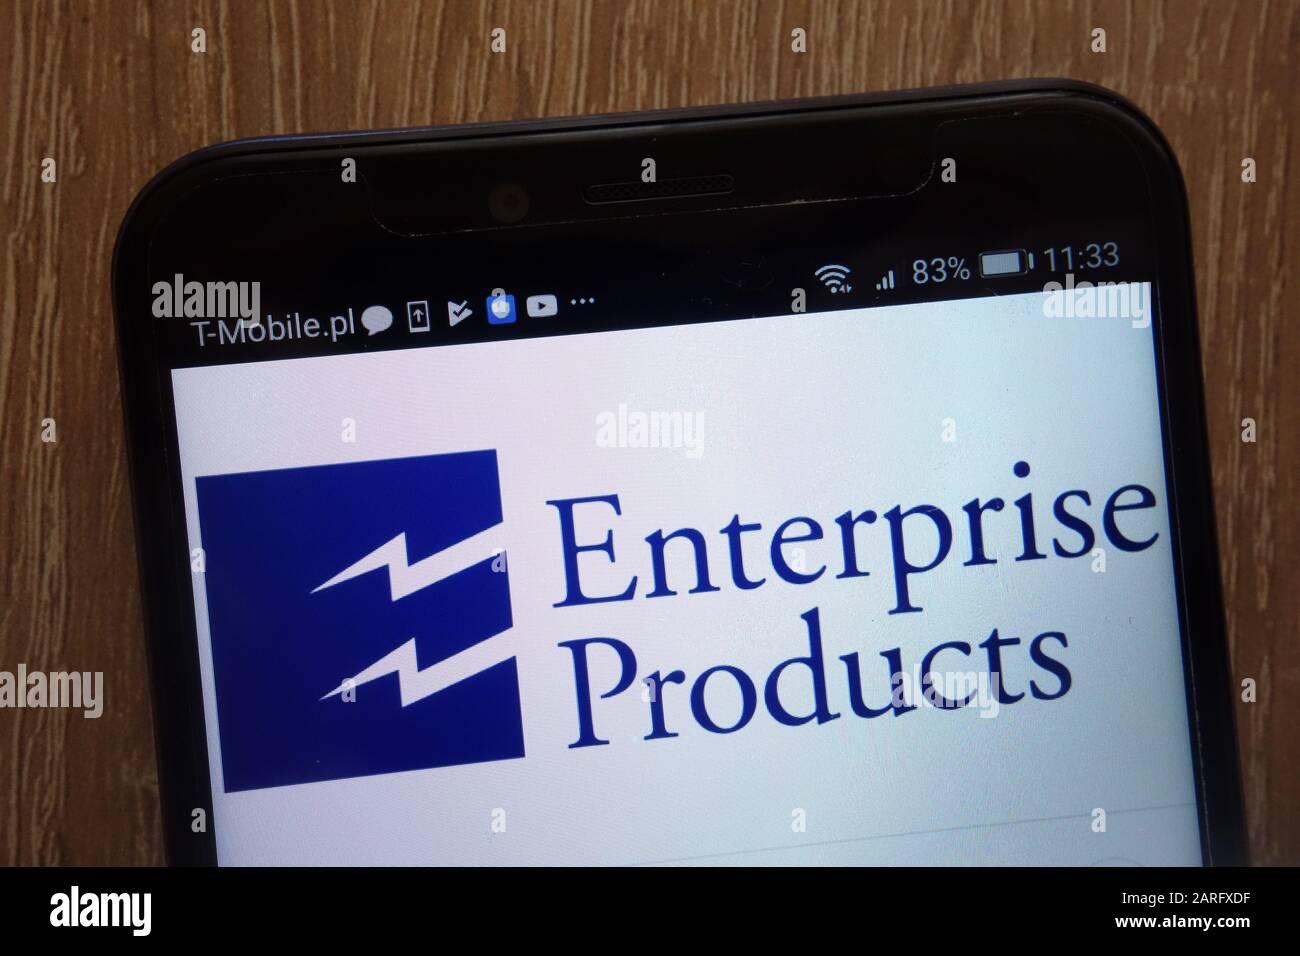 Enterprise Products Partners L.P. logo displayed on a modern smartphone Stock Photo